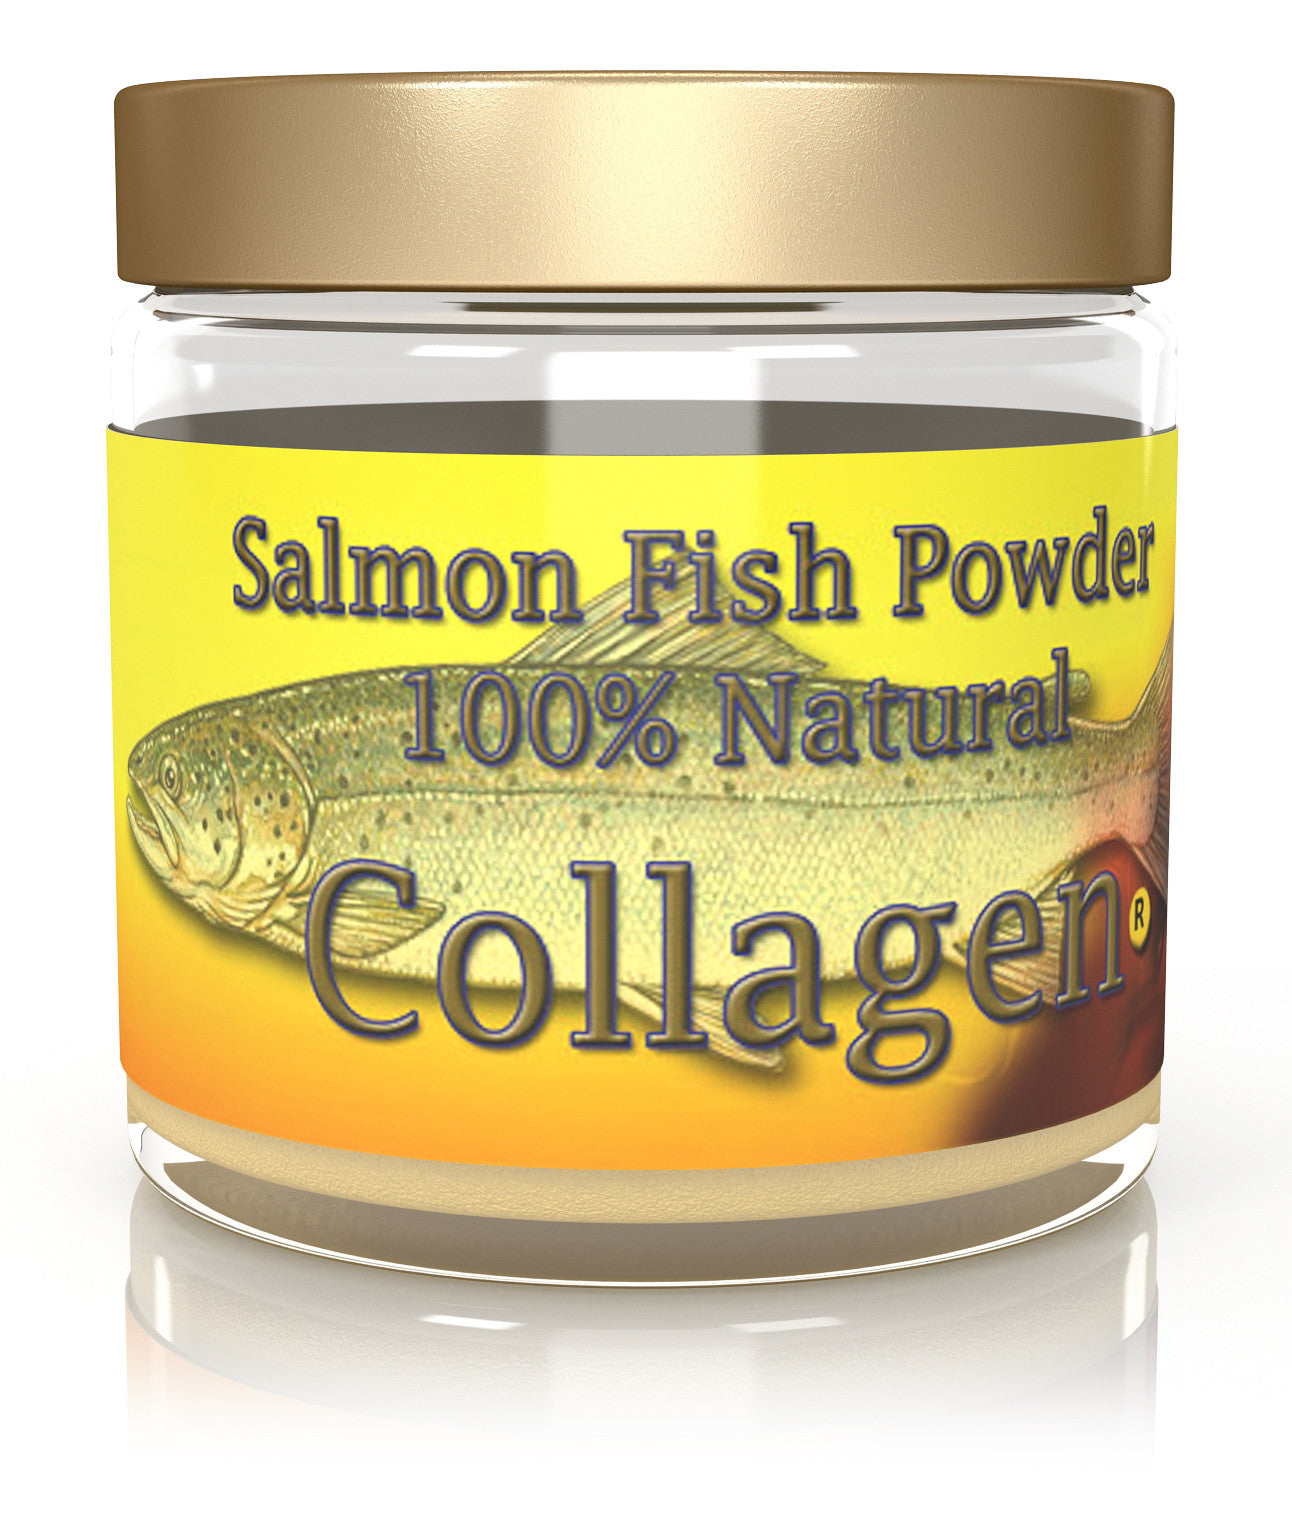 Best And Pure Marine Collagen Supplements By Salmon